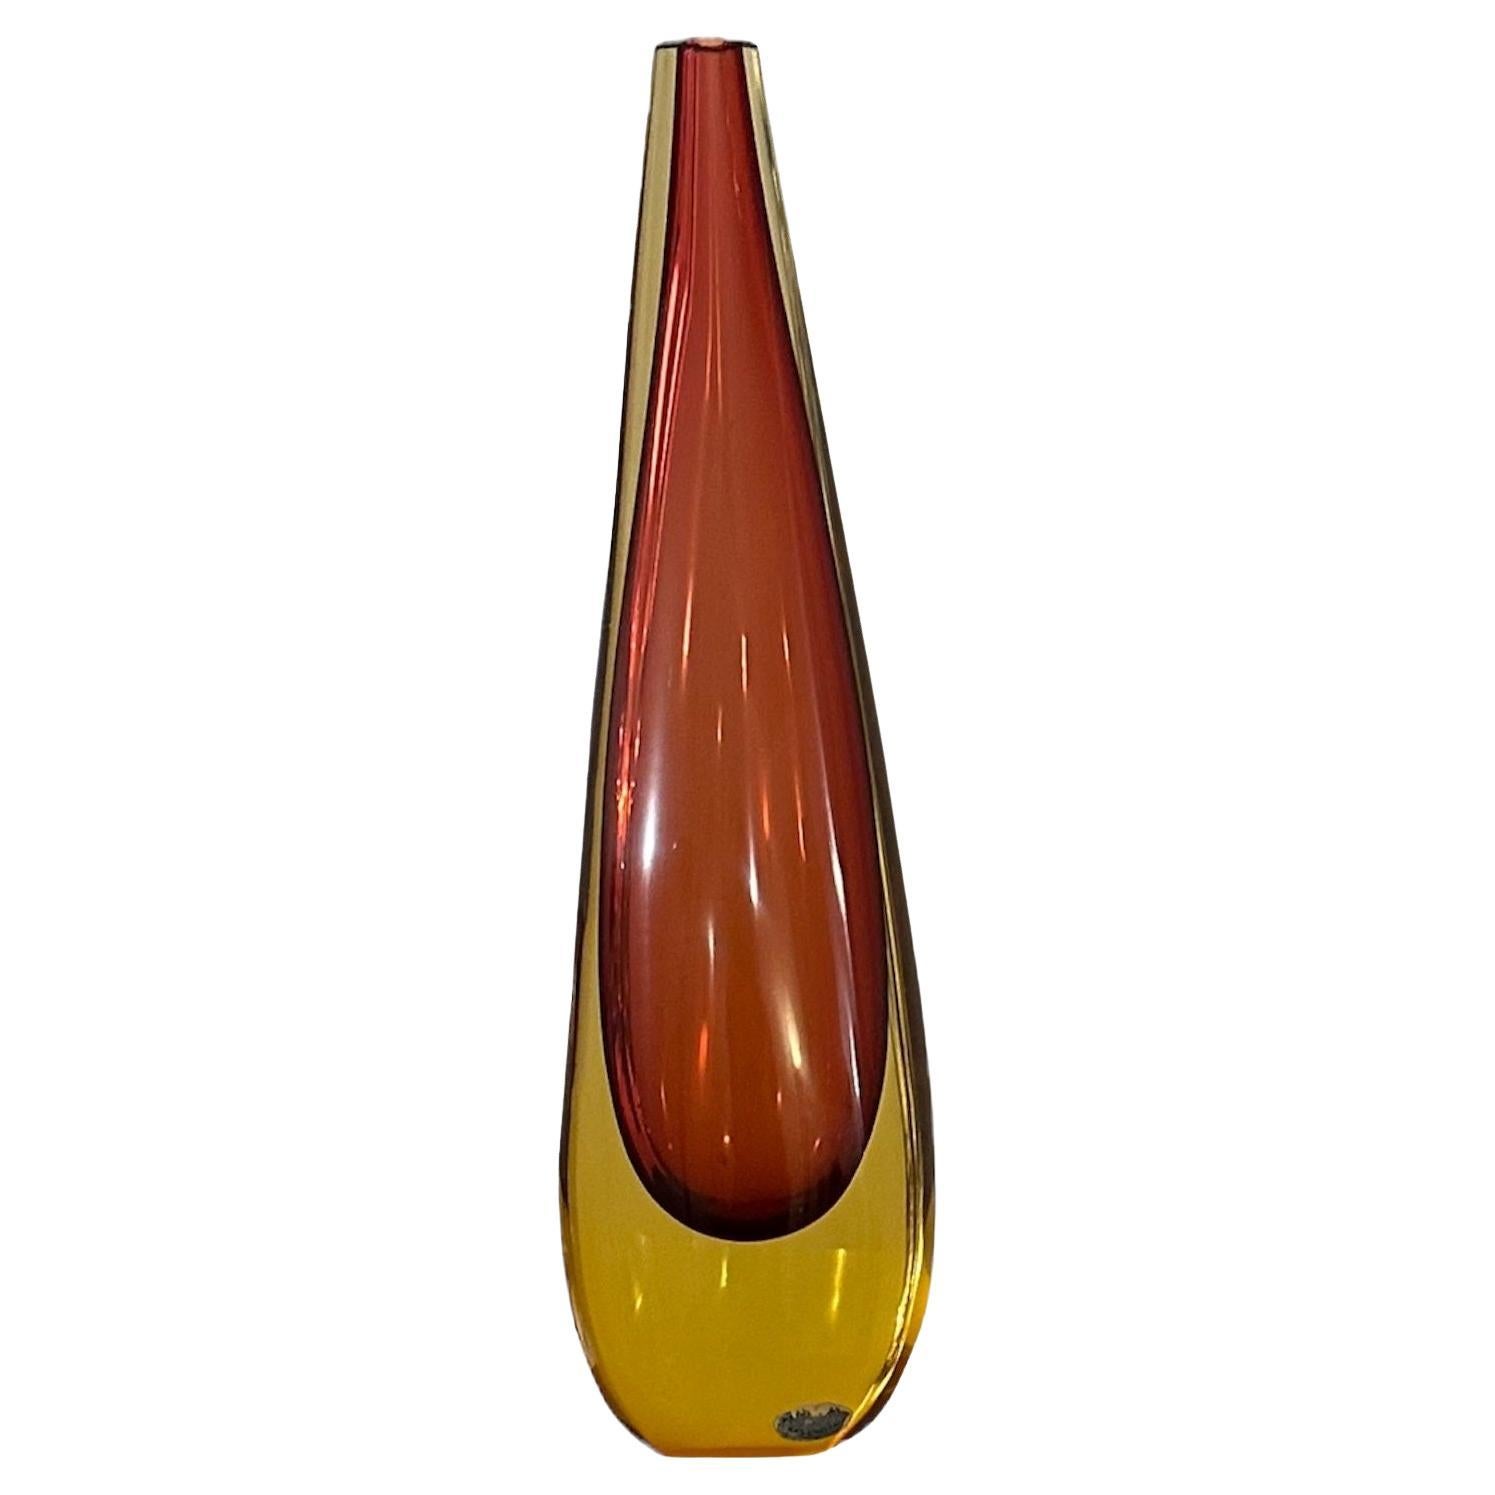 Amaizing Murano , 1930, Style Art Deco, Label : Made Murano Glass made in Italy